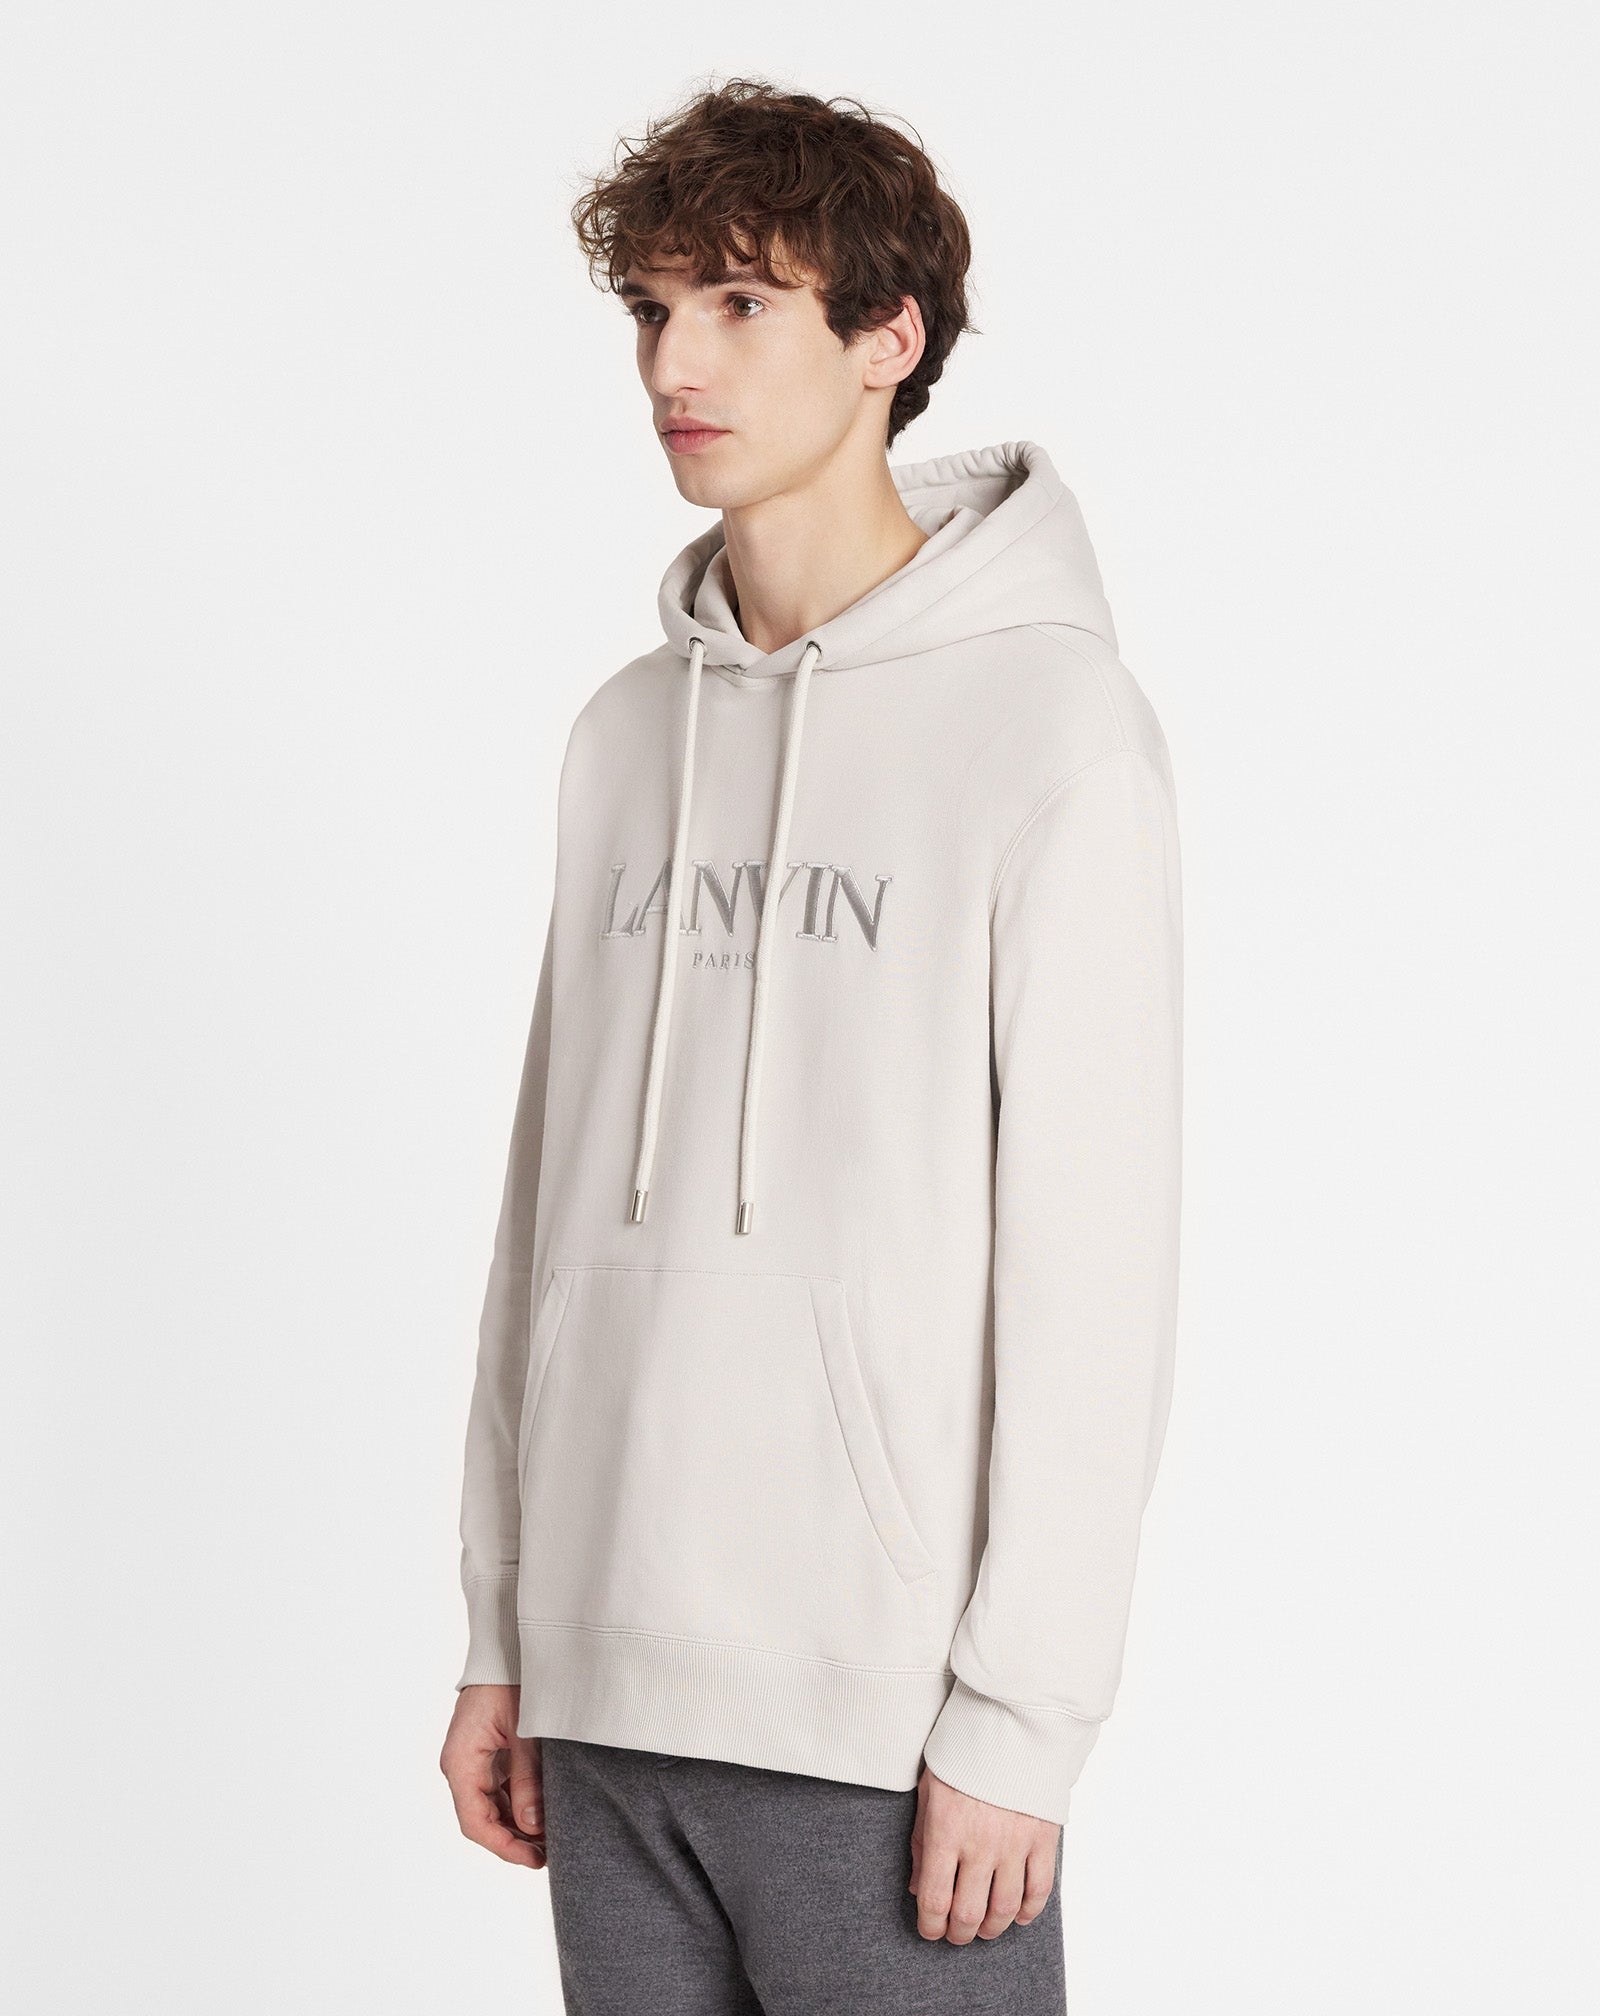 OVERSIZED EMBROIDERED LANVIN PARIS HOODIE - 3